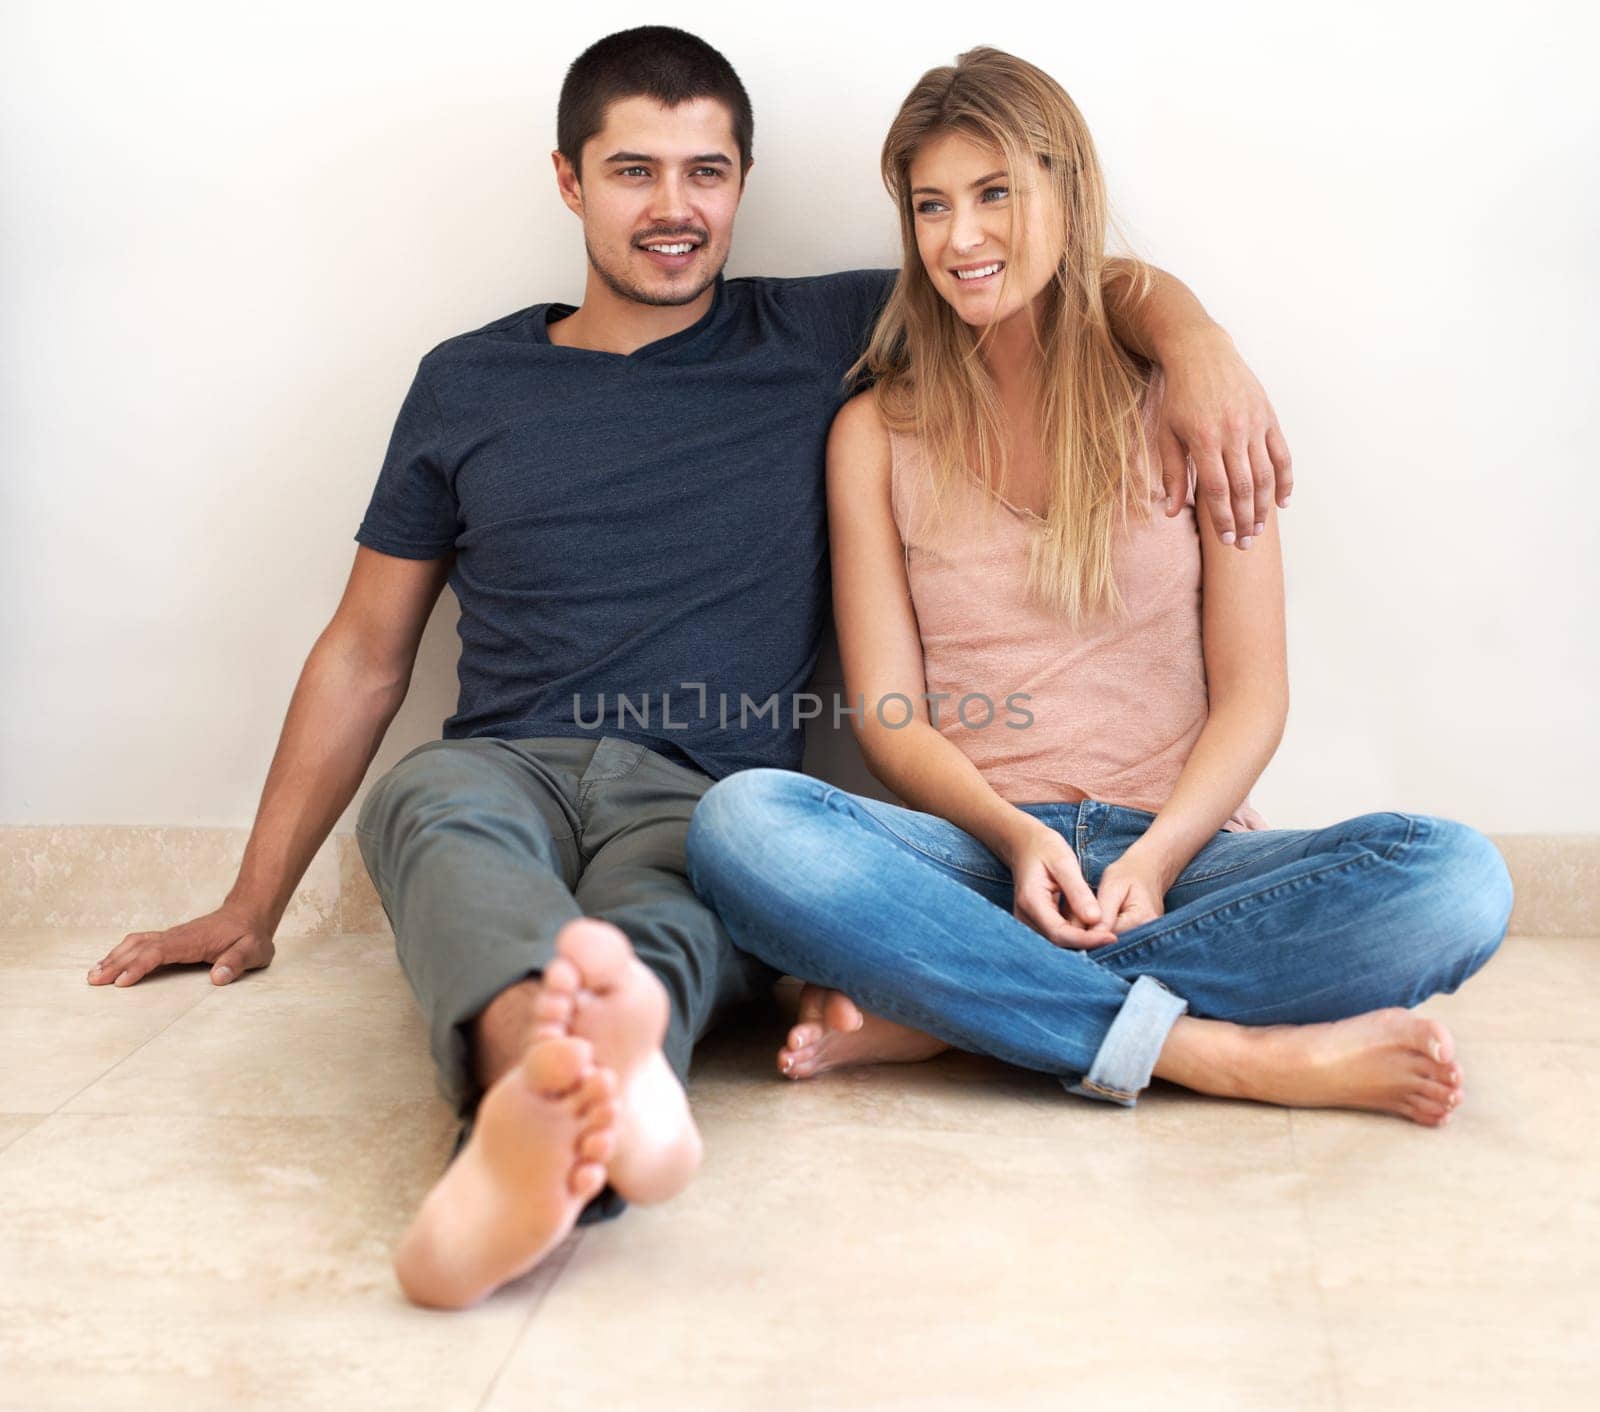 Hug, relax and couple on the floor of their new house talking, bond and excited for real estate success. Property, moving and man and woman sitting on living room ground together in their dream home.